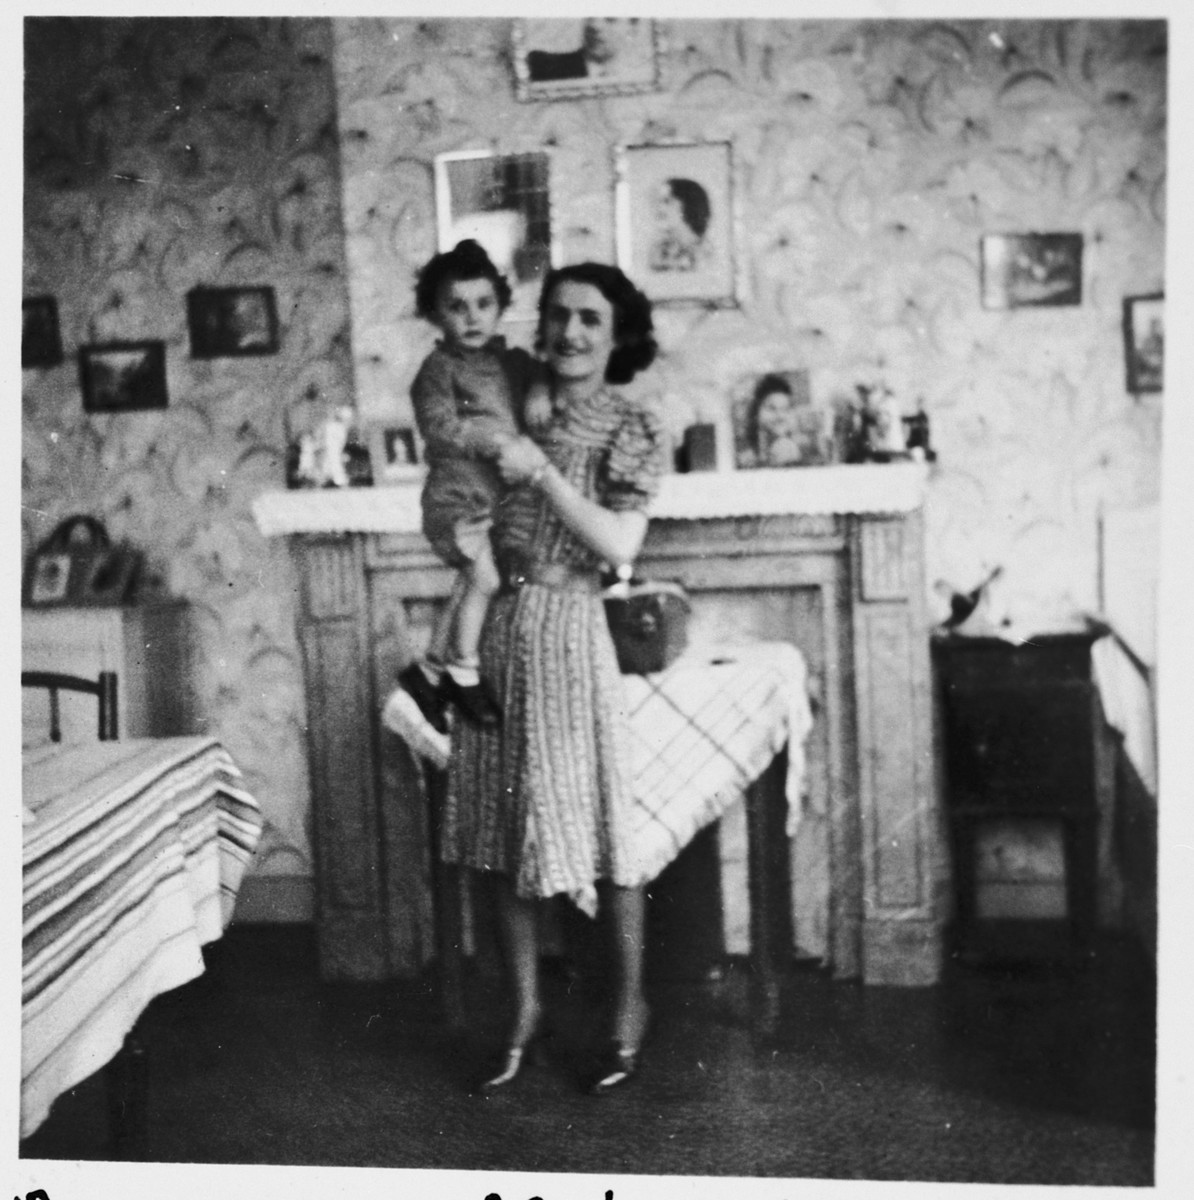 A Jewish mother holds her young son in their apartment in Brussels, where they are living in hiding as Christians.

Pictured are Leah and Nathan (Nounou) Ciechanow.  They were subsequently deported to their death in Auschwitz.